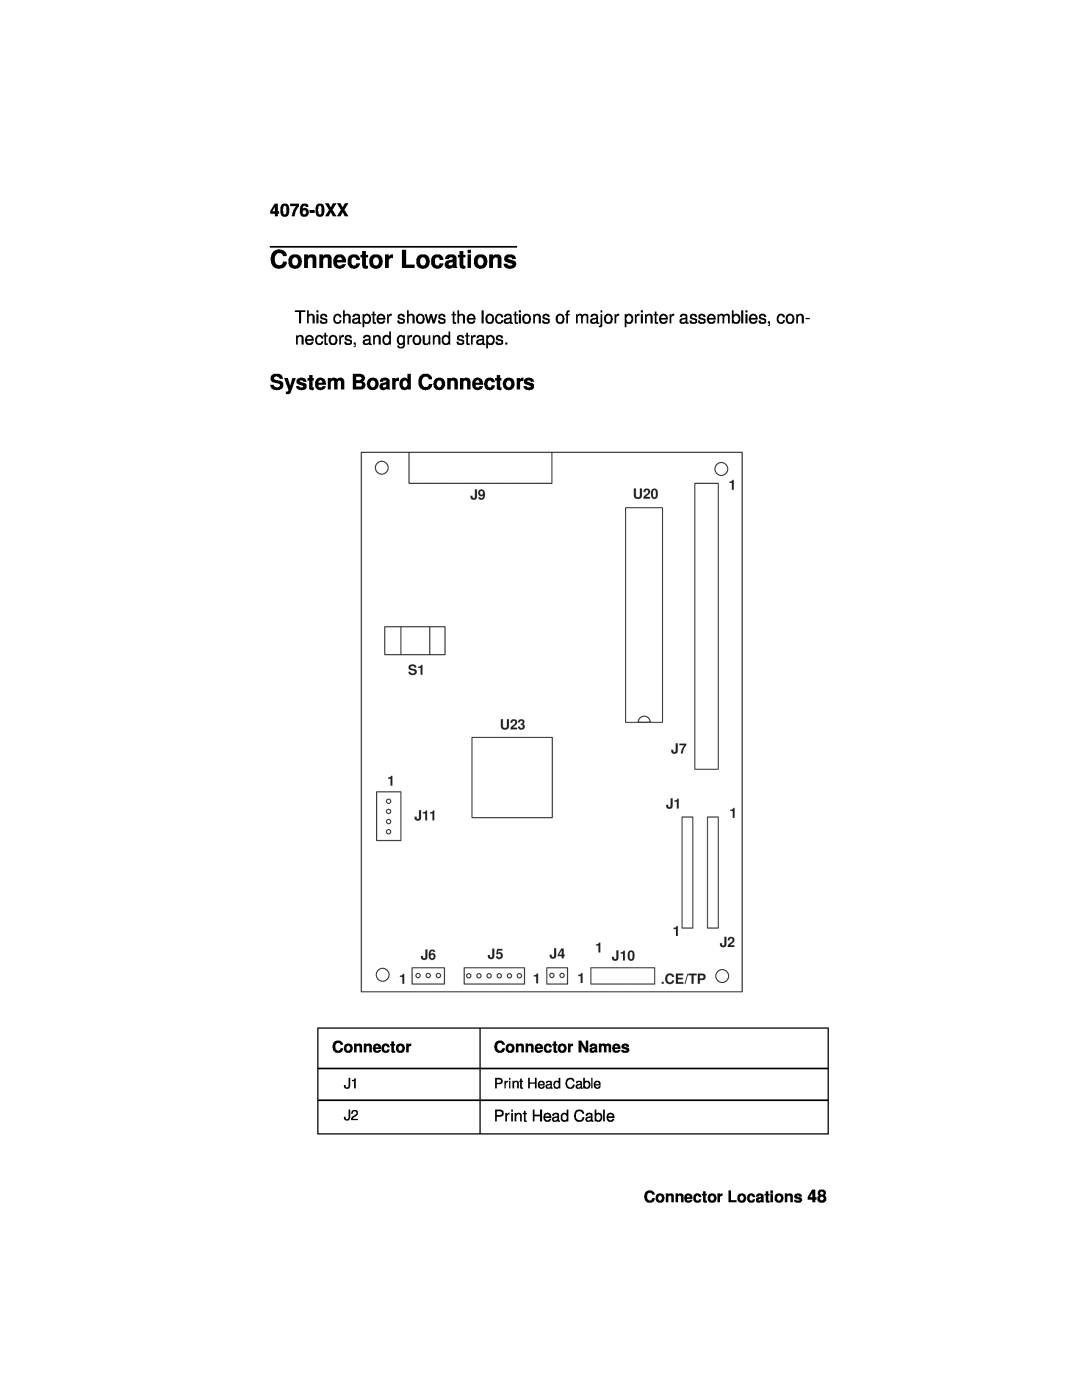 Lexmark 4076-0XX manual Connector Locations, System Board Connectors, Connector Names, Ce/Tp 